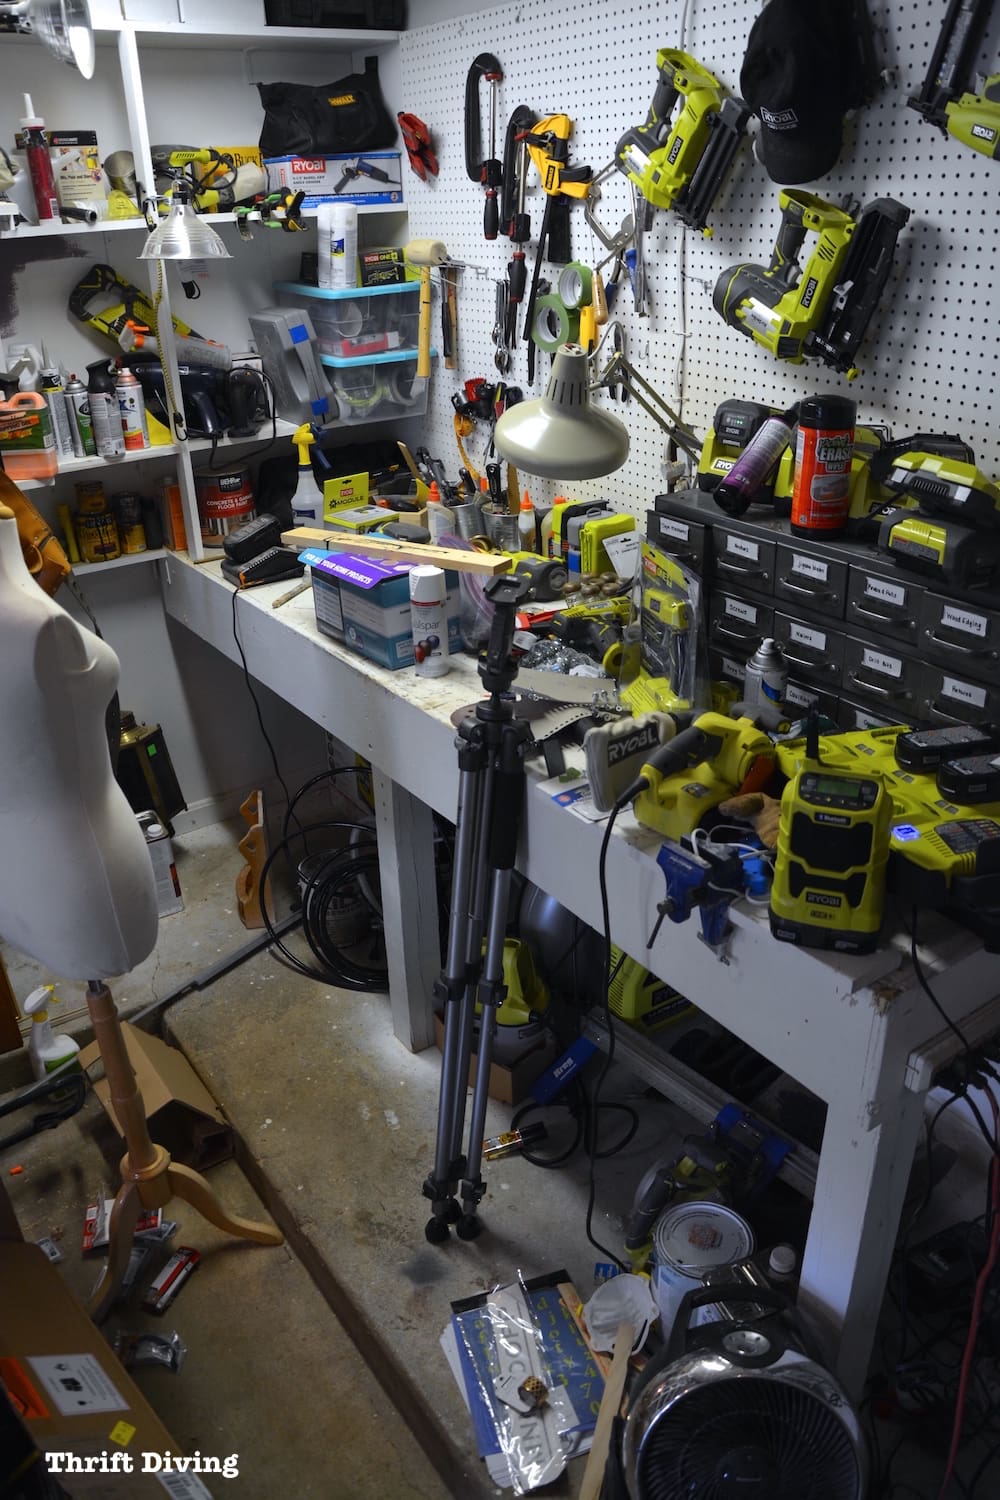 Workbench paint makeover - How to Paint a Workbench Using Beyond Paint - Cluttered workbench. - Thrift Diving